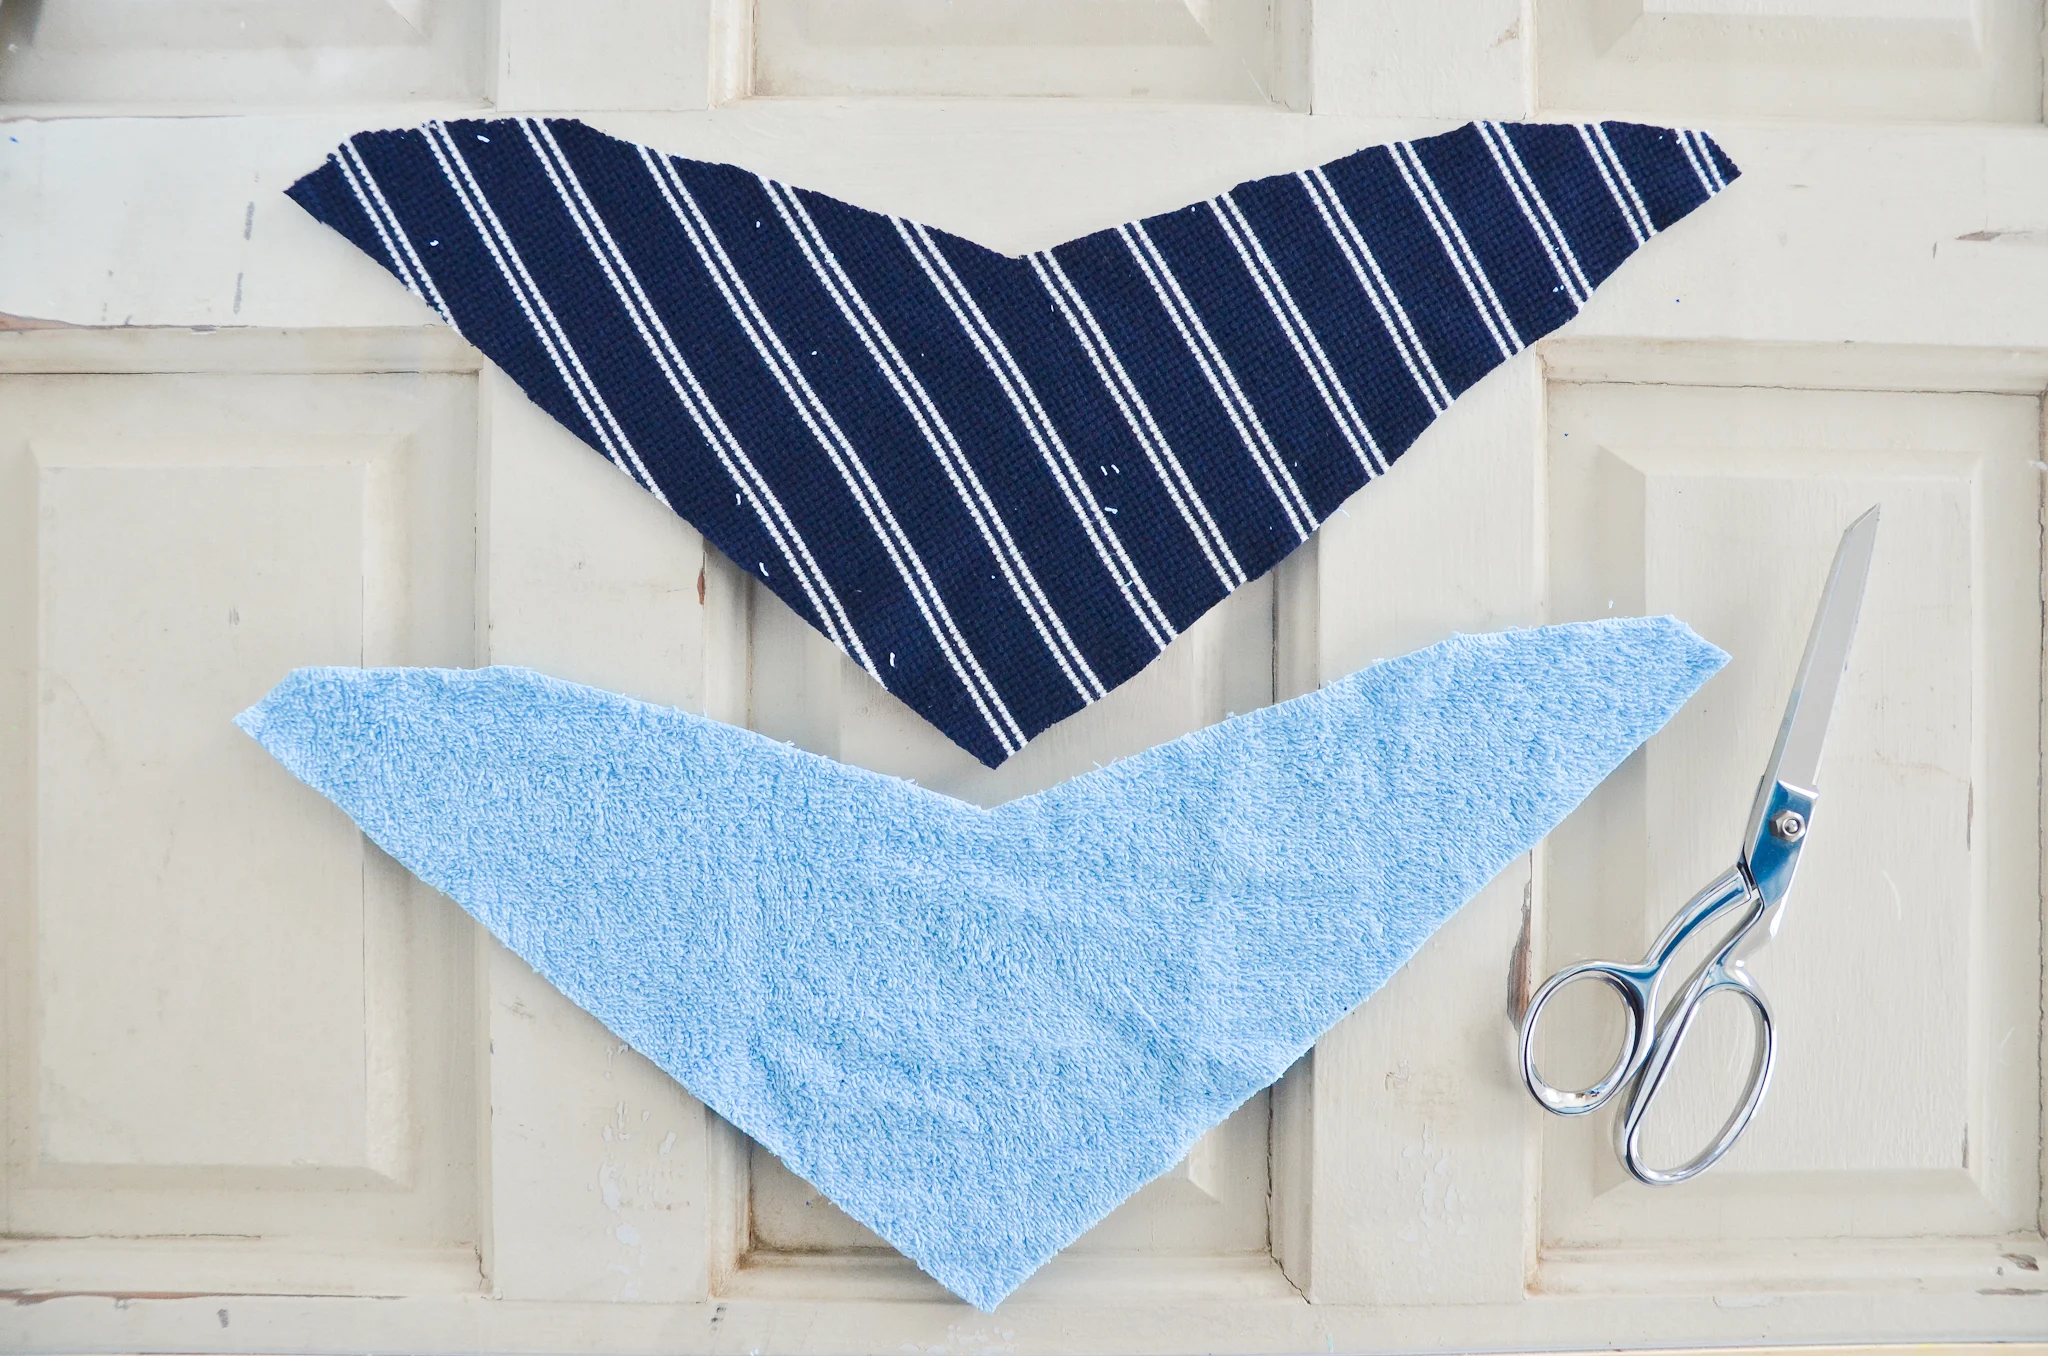 Learn How To Sew Loop Velcro on Anything with this DIY Tutorial